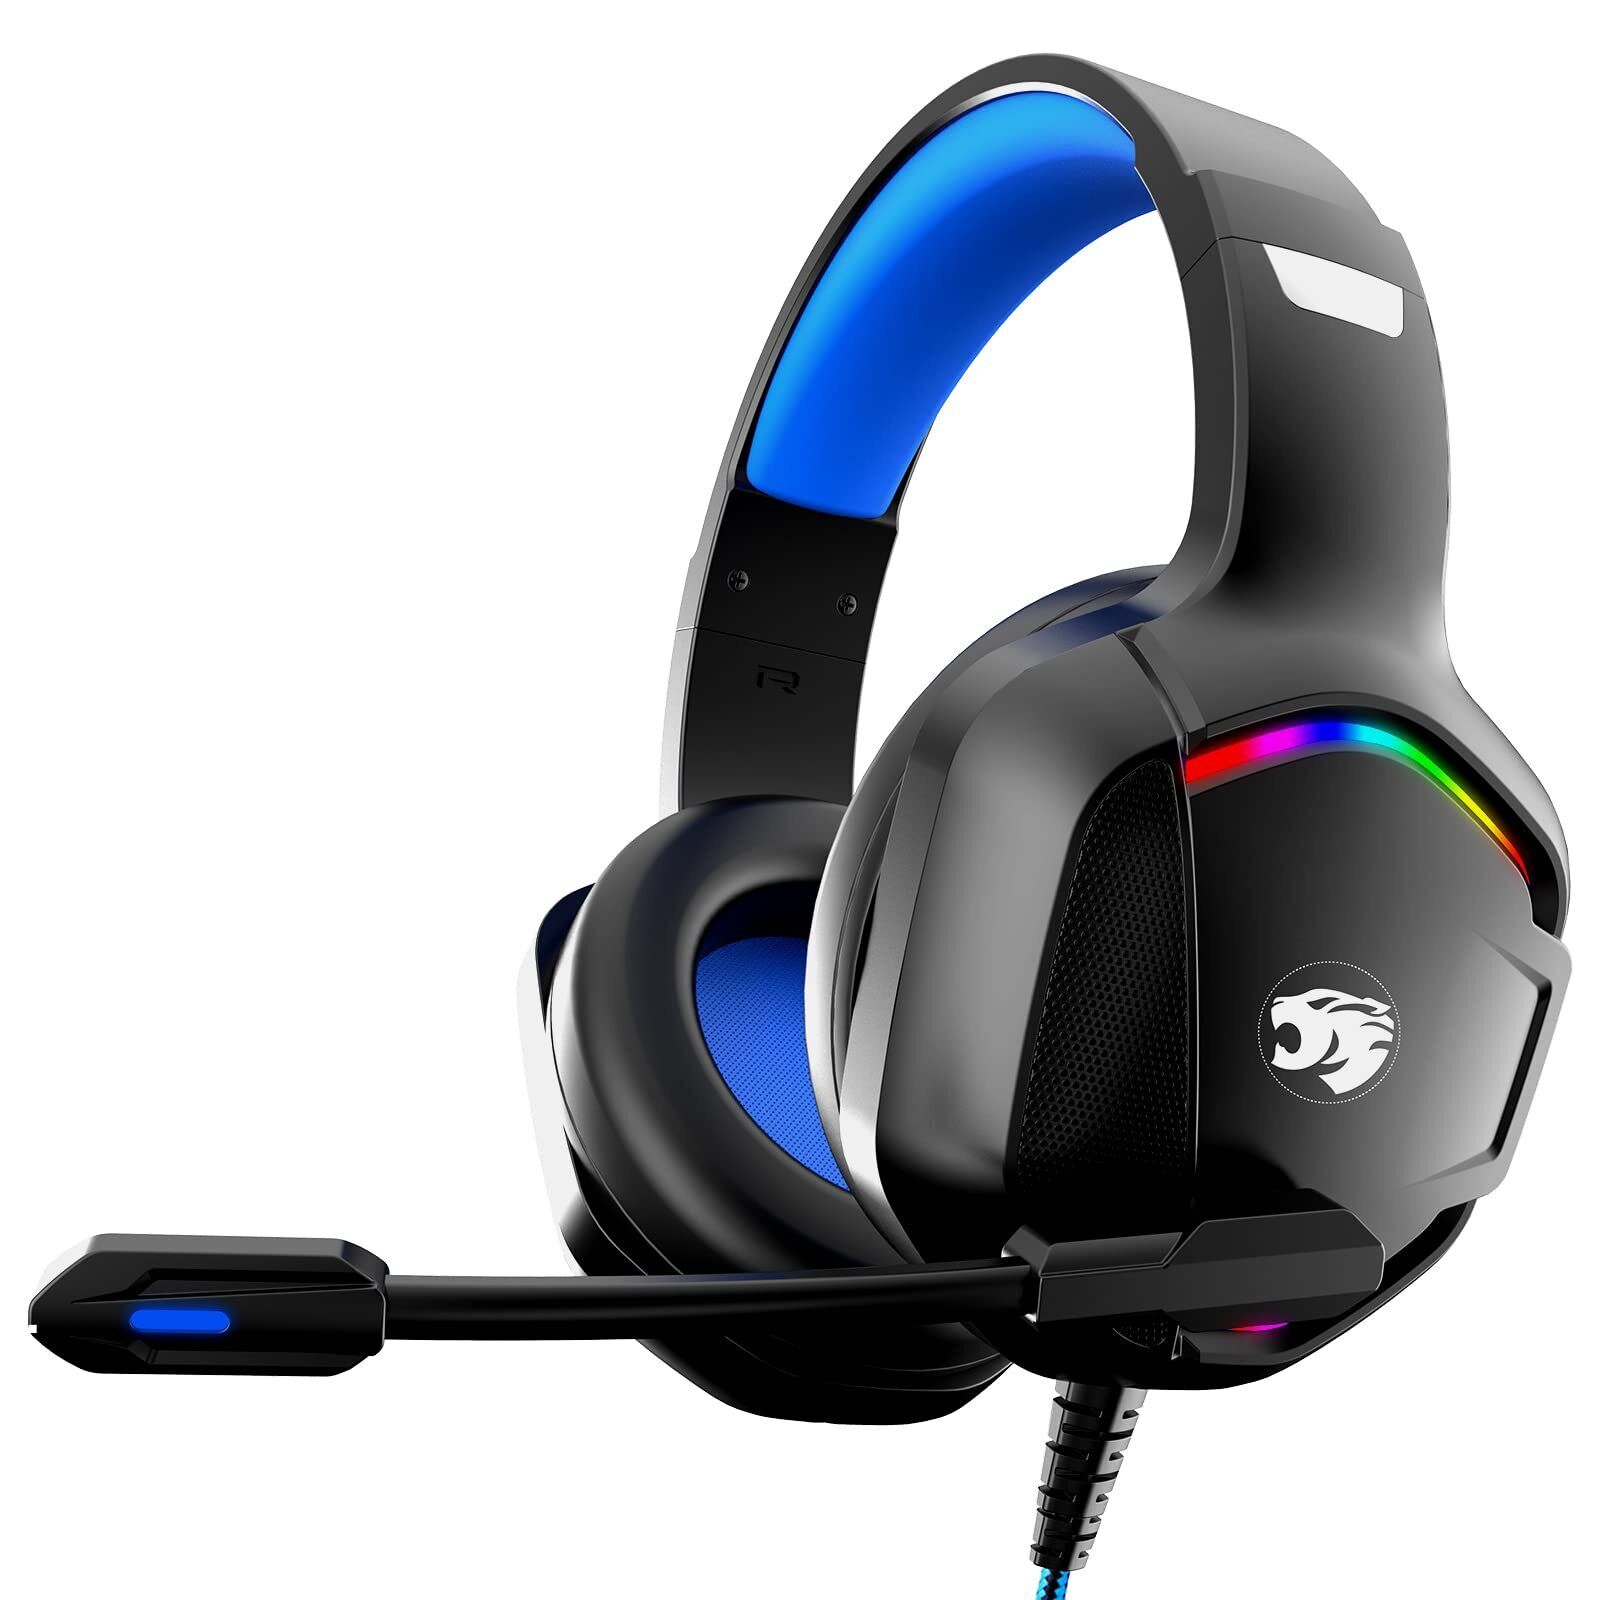 A36 Gaming Headset with Microphone for Pc, Xbox One Series X/s, Ps4, Ps5, Swi...